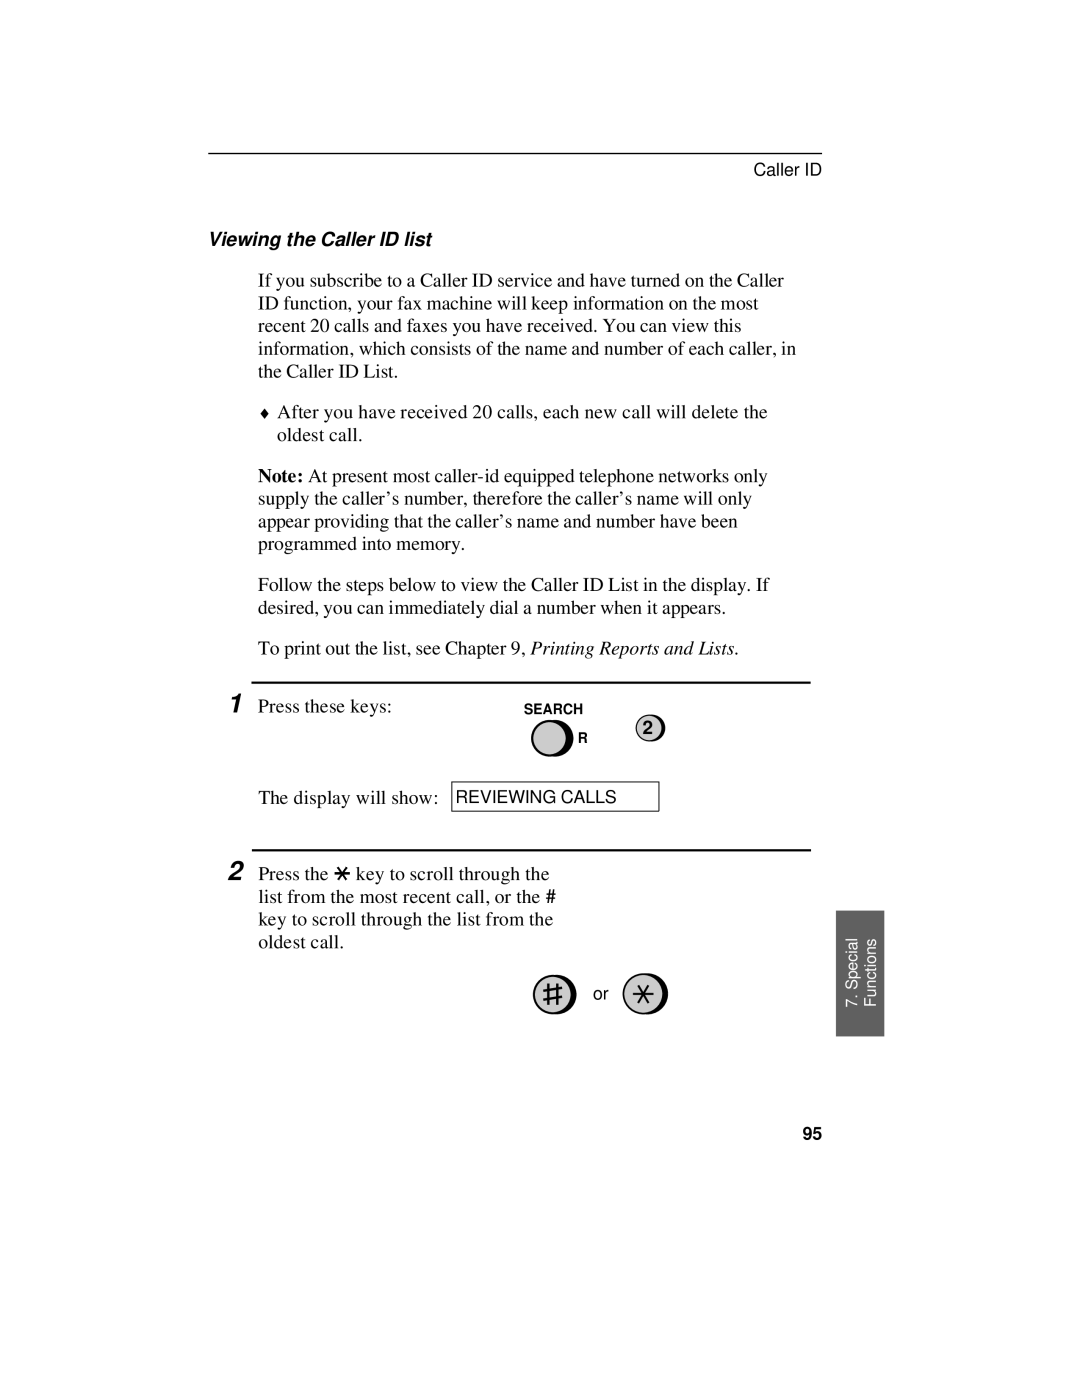 Sharp UX-470 operation manual Viewing the Caller ID list 